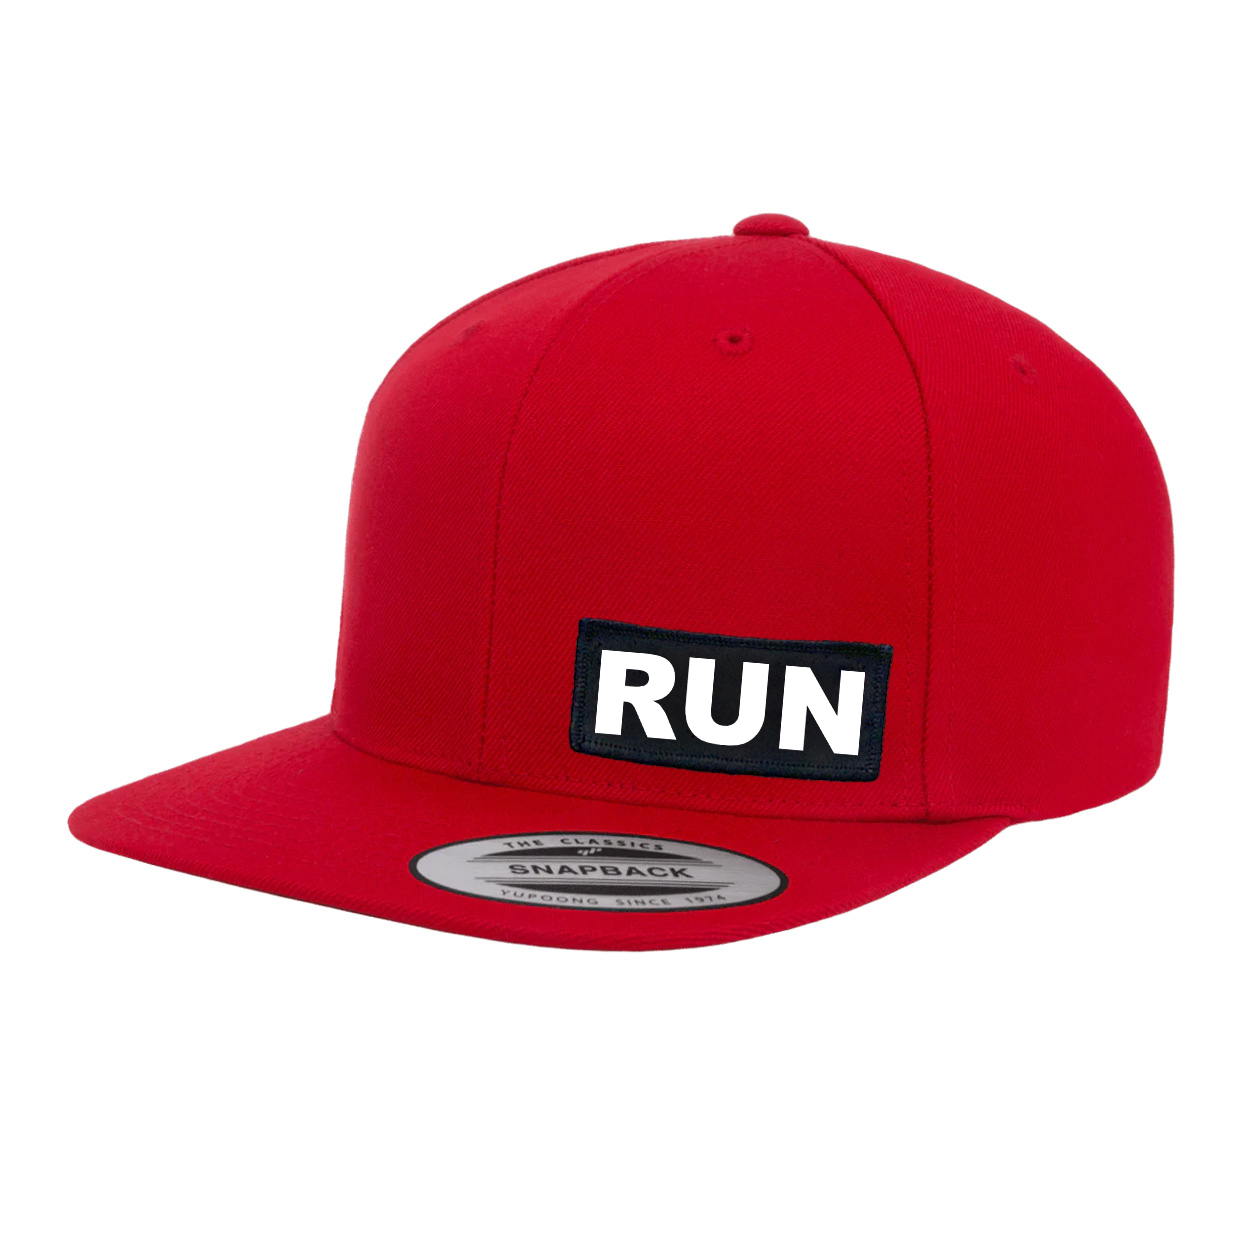 Run Brand Logo Night Out Woven Patch Snapback Flat Brim Hat Red 